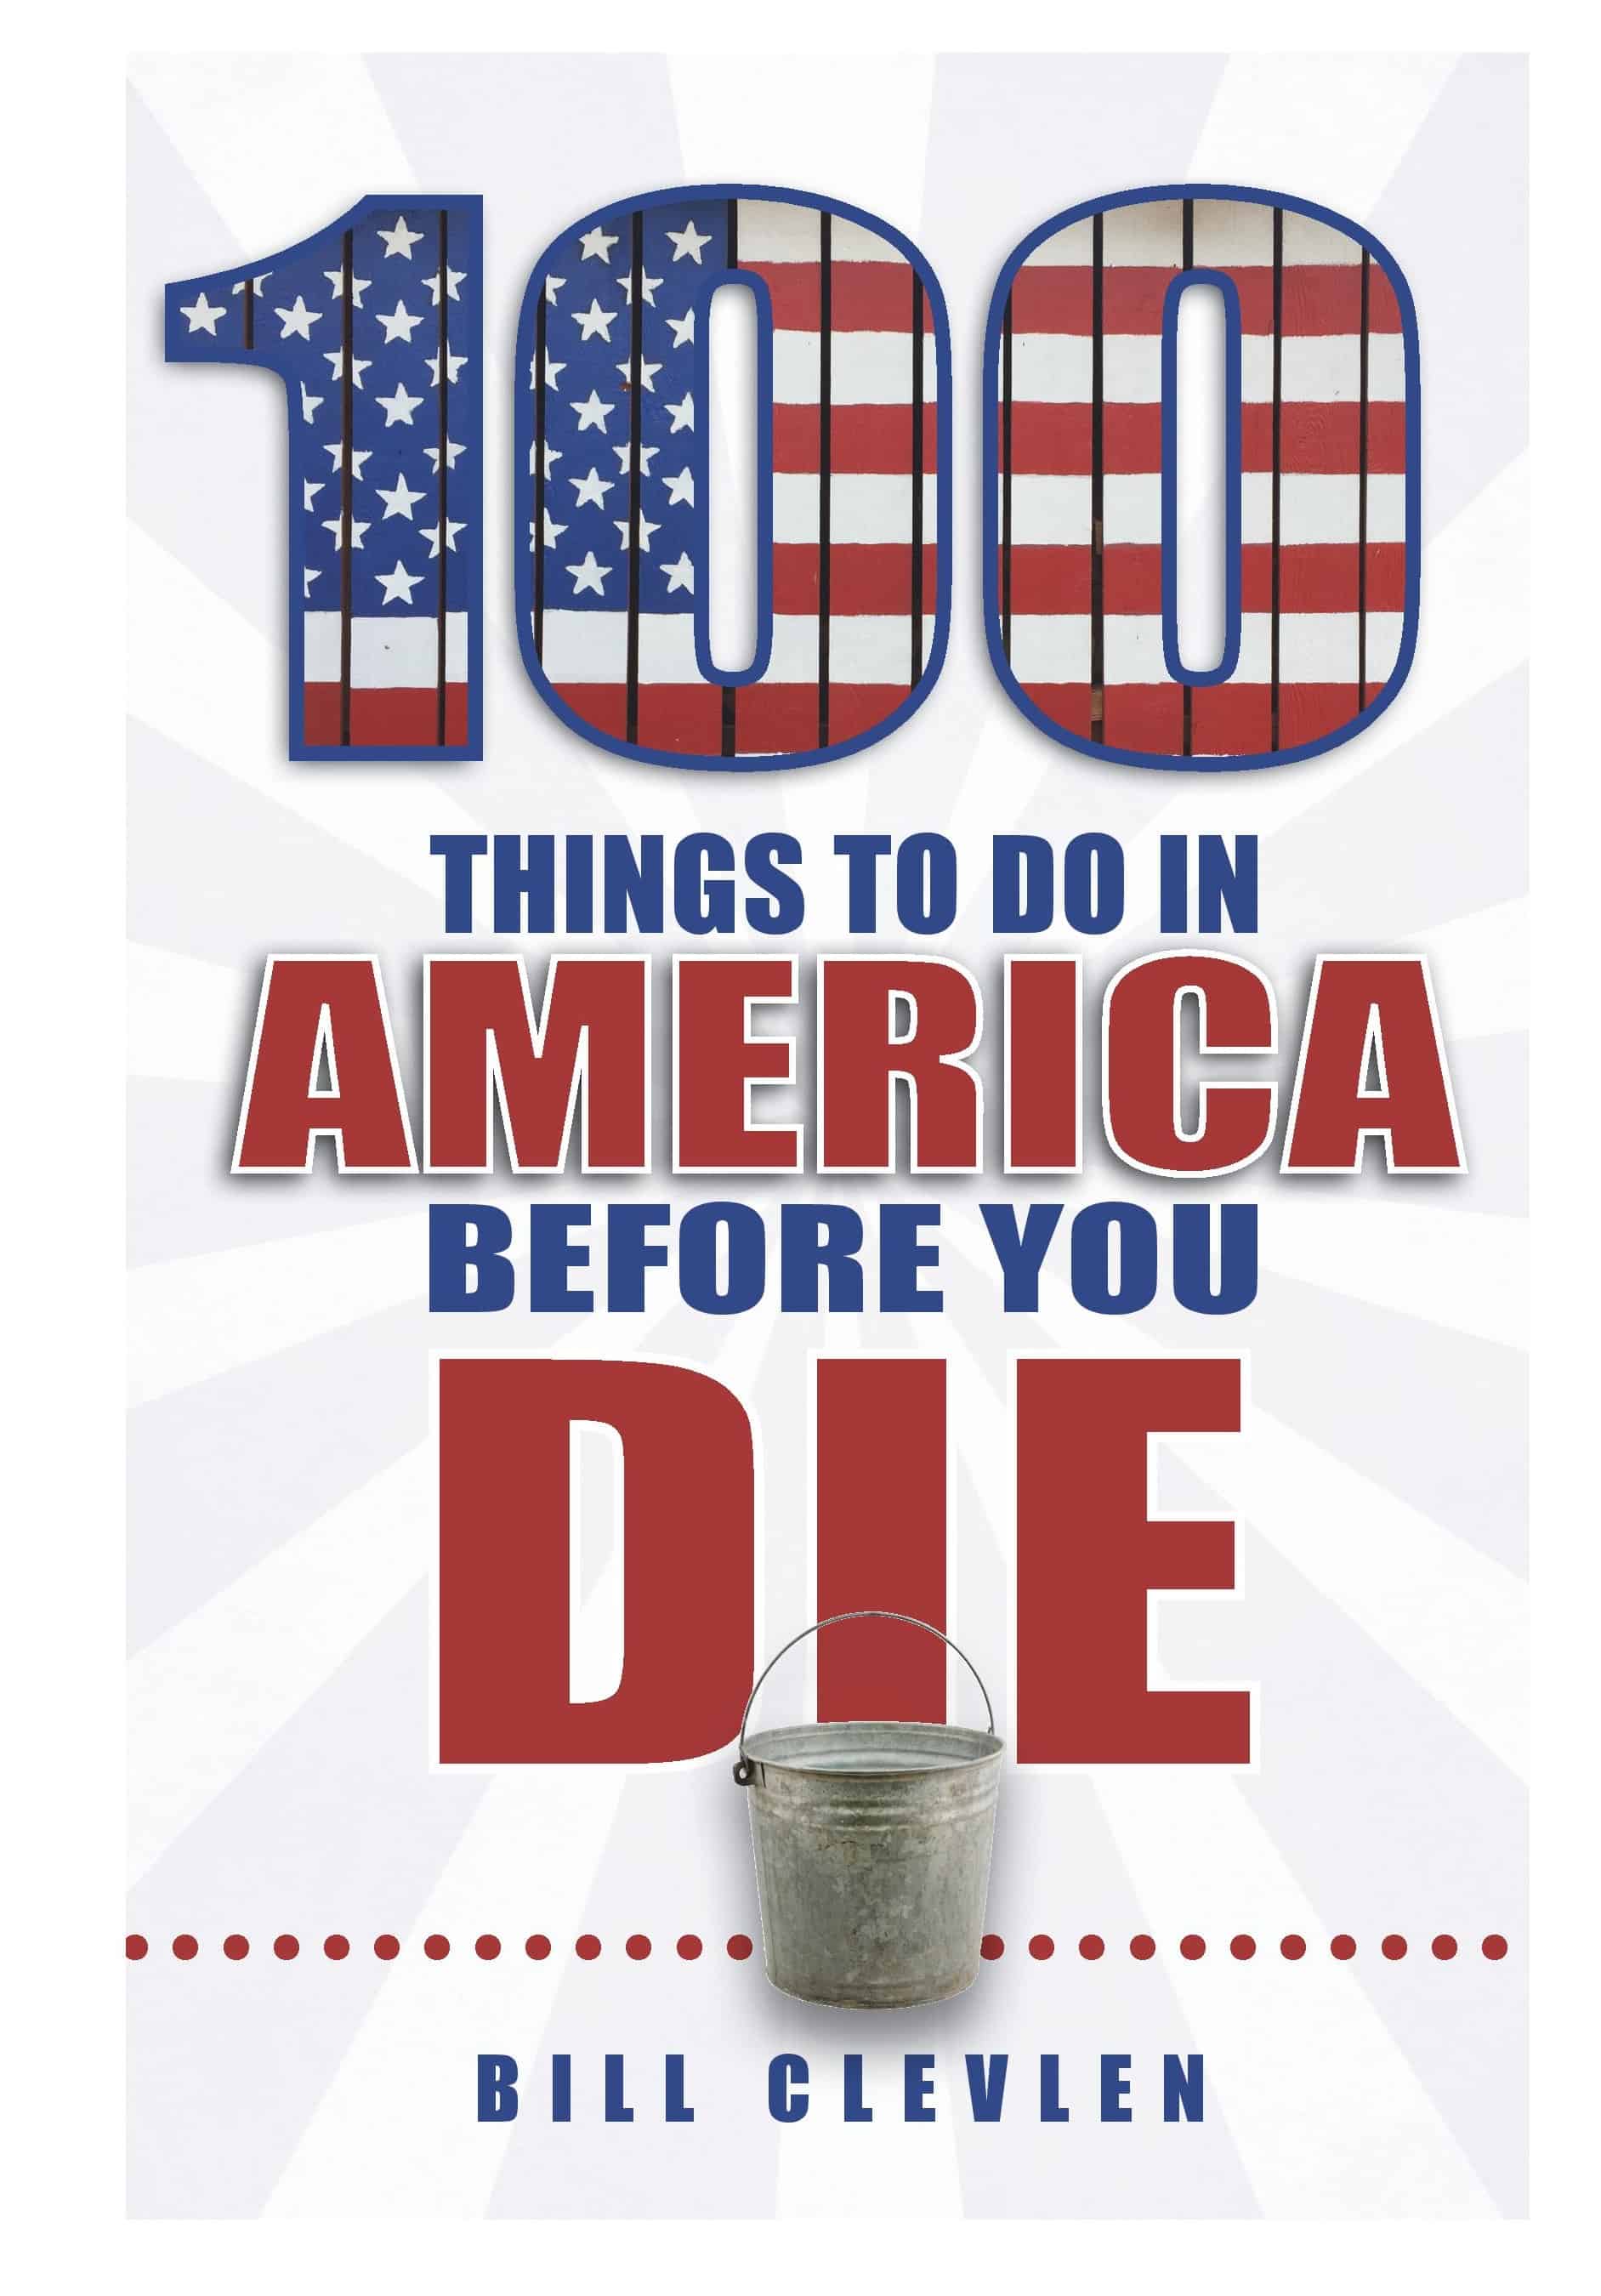 100 Things To Do In America by author Bill Clevlen